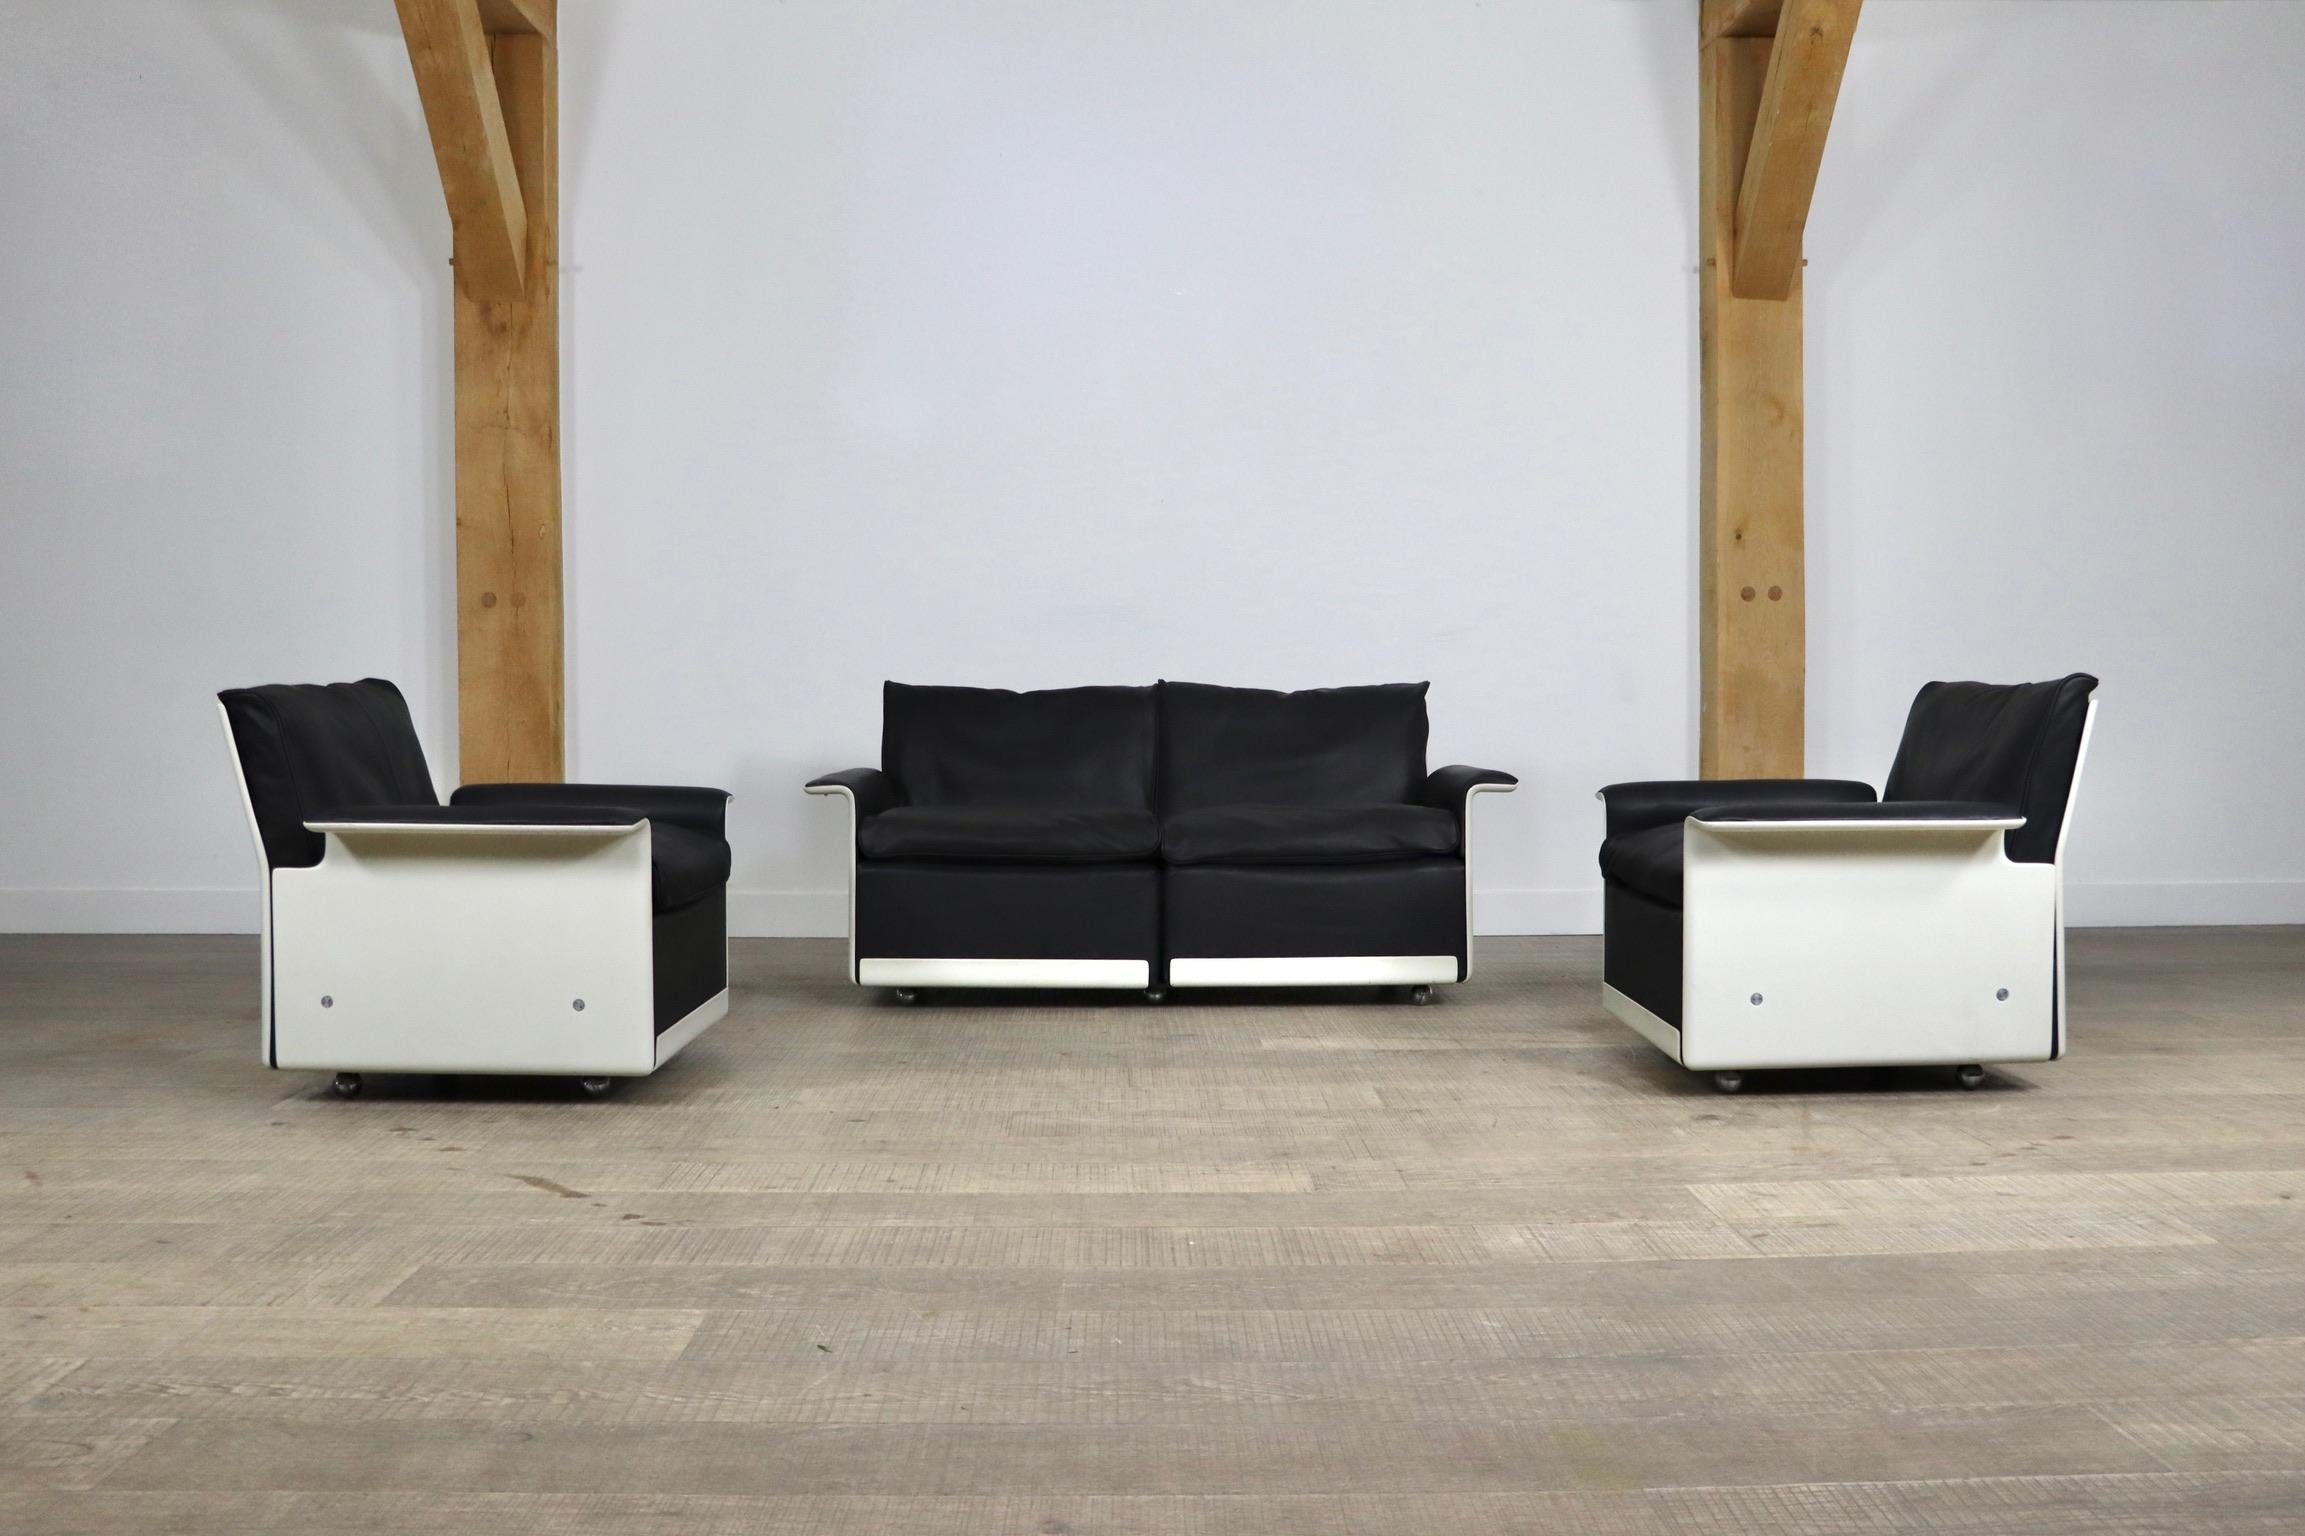 Amazing set of model 620 lounge chairs and sofa in black leather and white frames, designed by Dieter Rams in 1962 for German manufacturer Vitsœ. The shells are made of A hot-pressed sheet moulding compound that sits on four chromed wheels. This